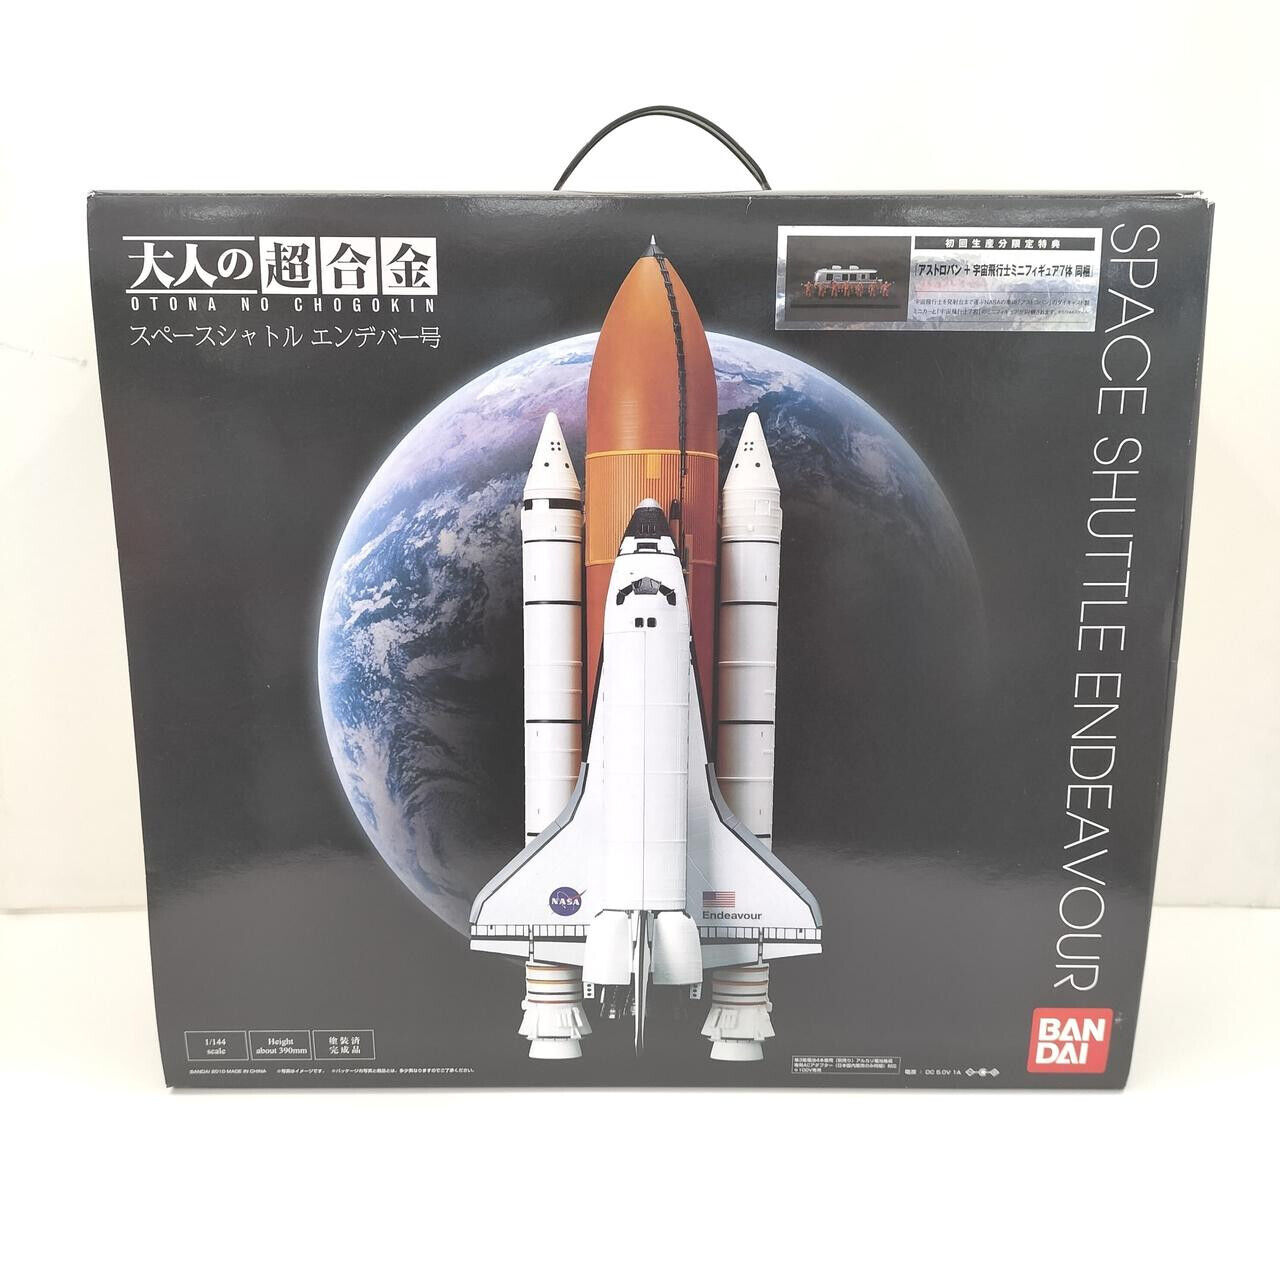 Bandai 1/144 Otona No Chogokin Space Shuttle Endeavour First Edition From Japan